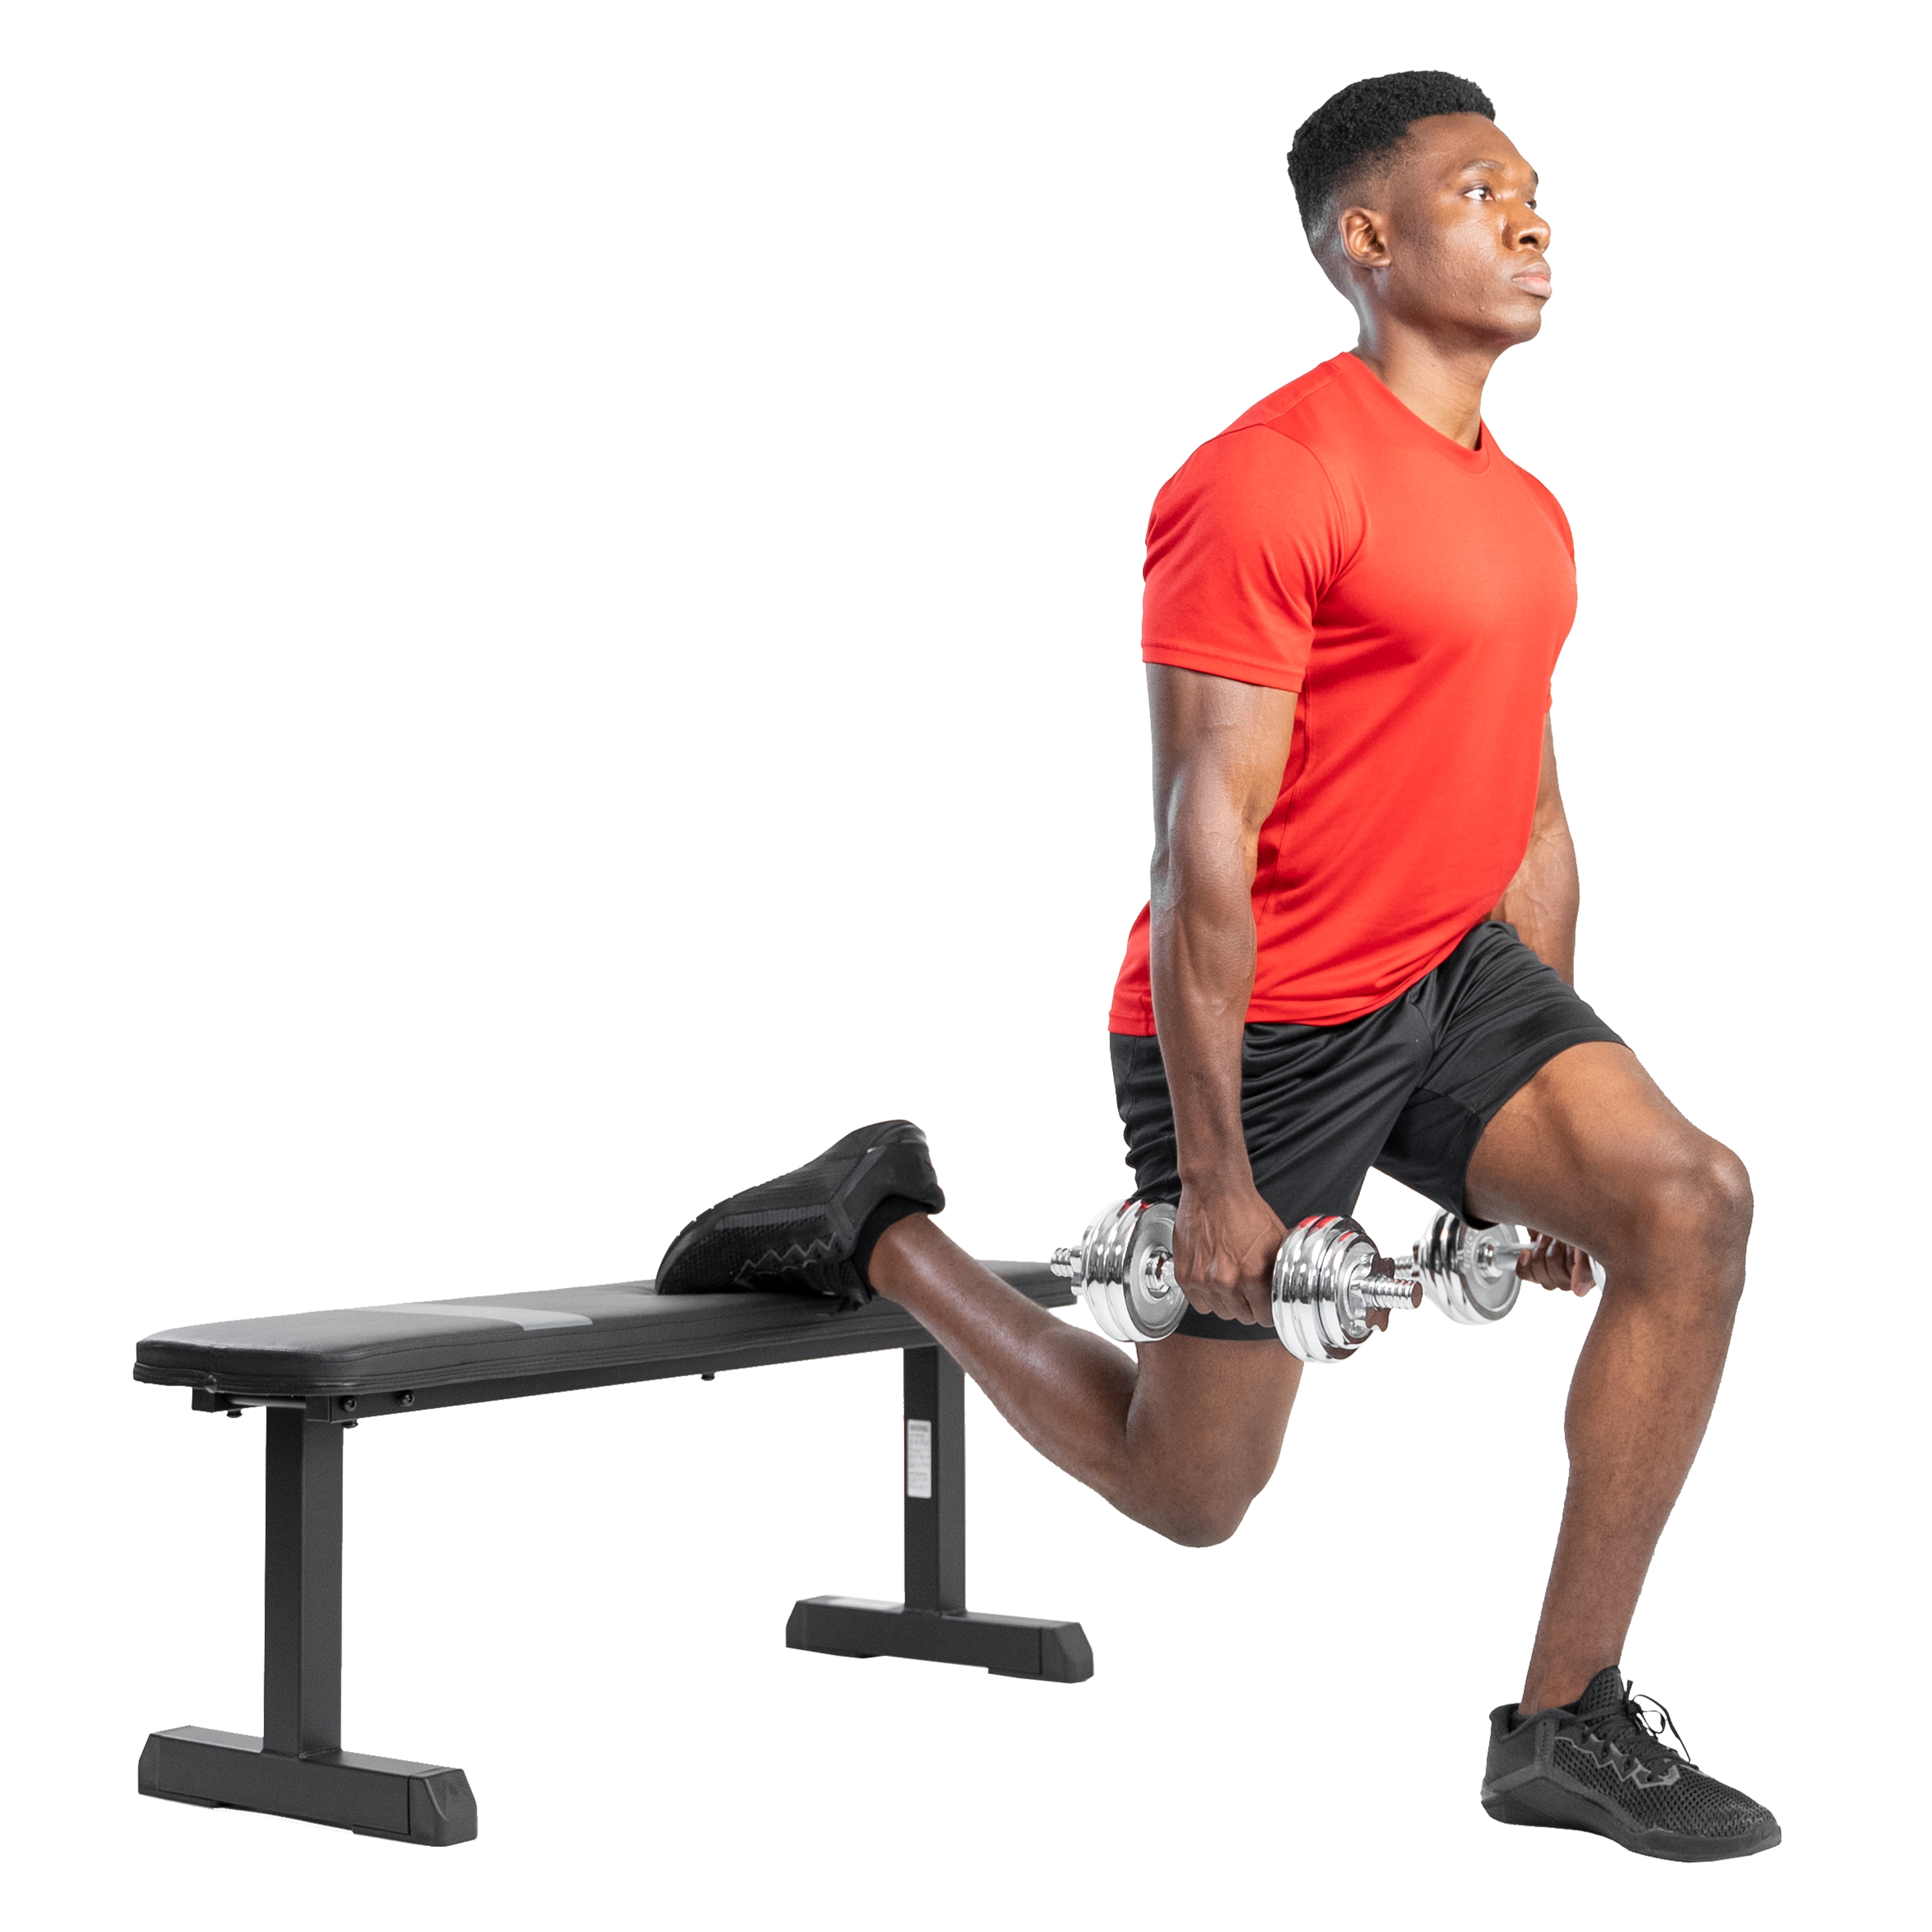 Sit Up Bench Flat Weight Bench with Sewn Vinyl Seats Home Workout Fitness Gym US 